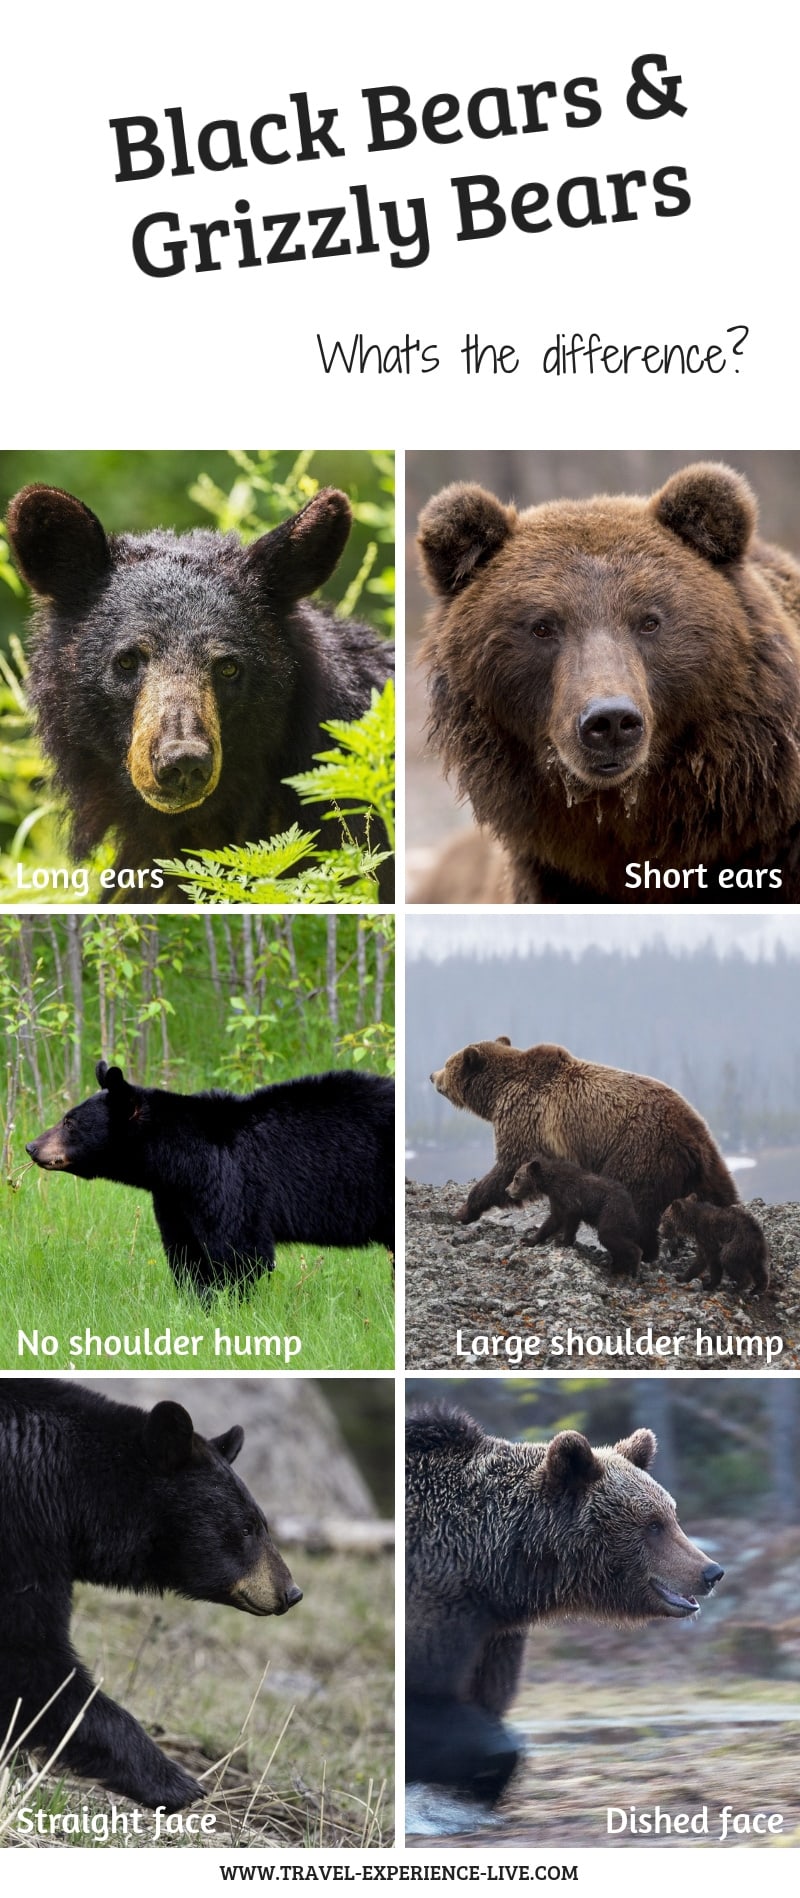 What Is the Difference Between Black Bears and Grizzly Bears